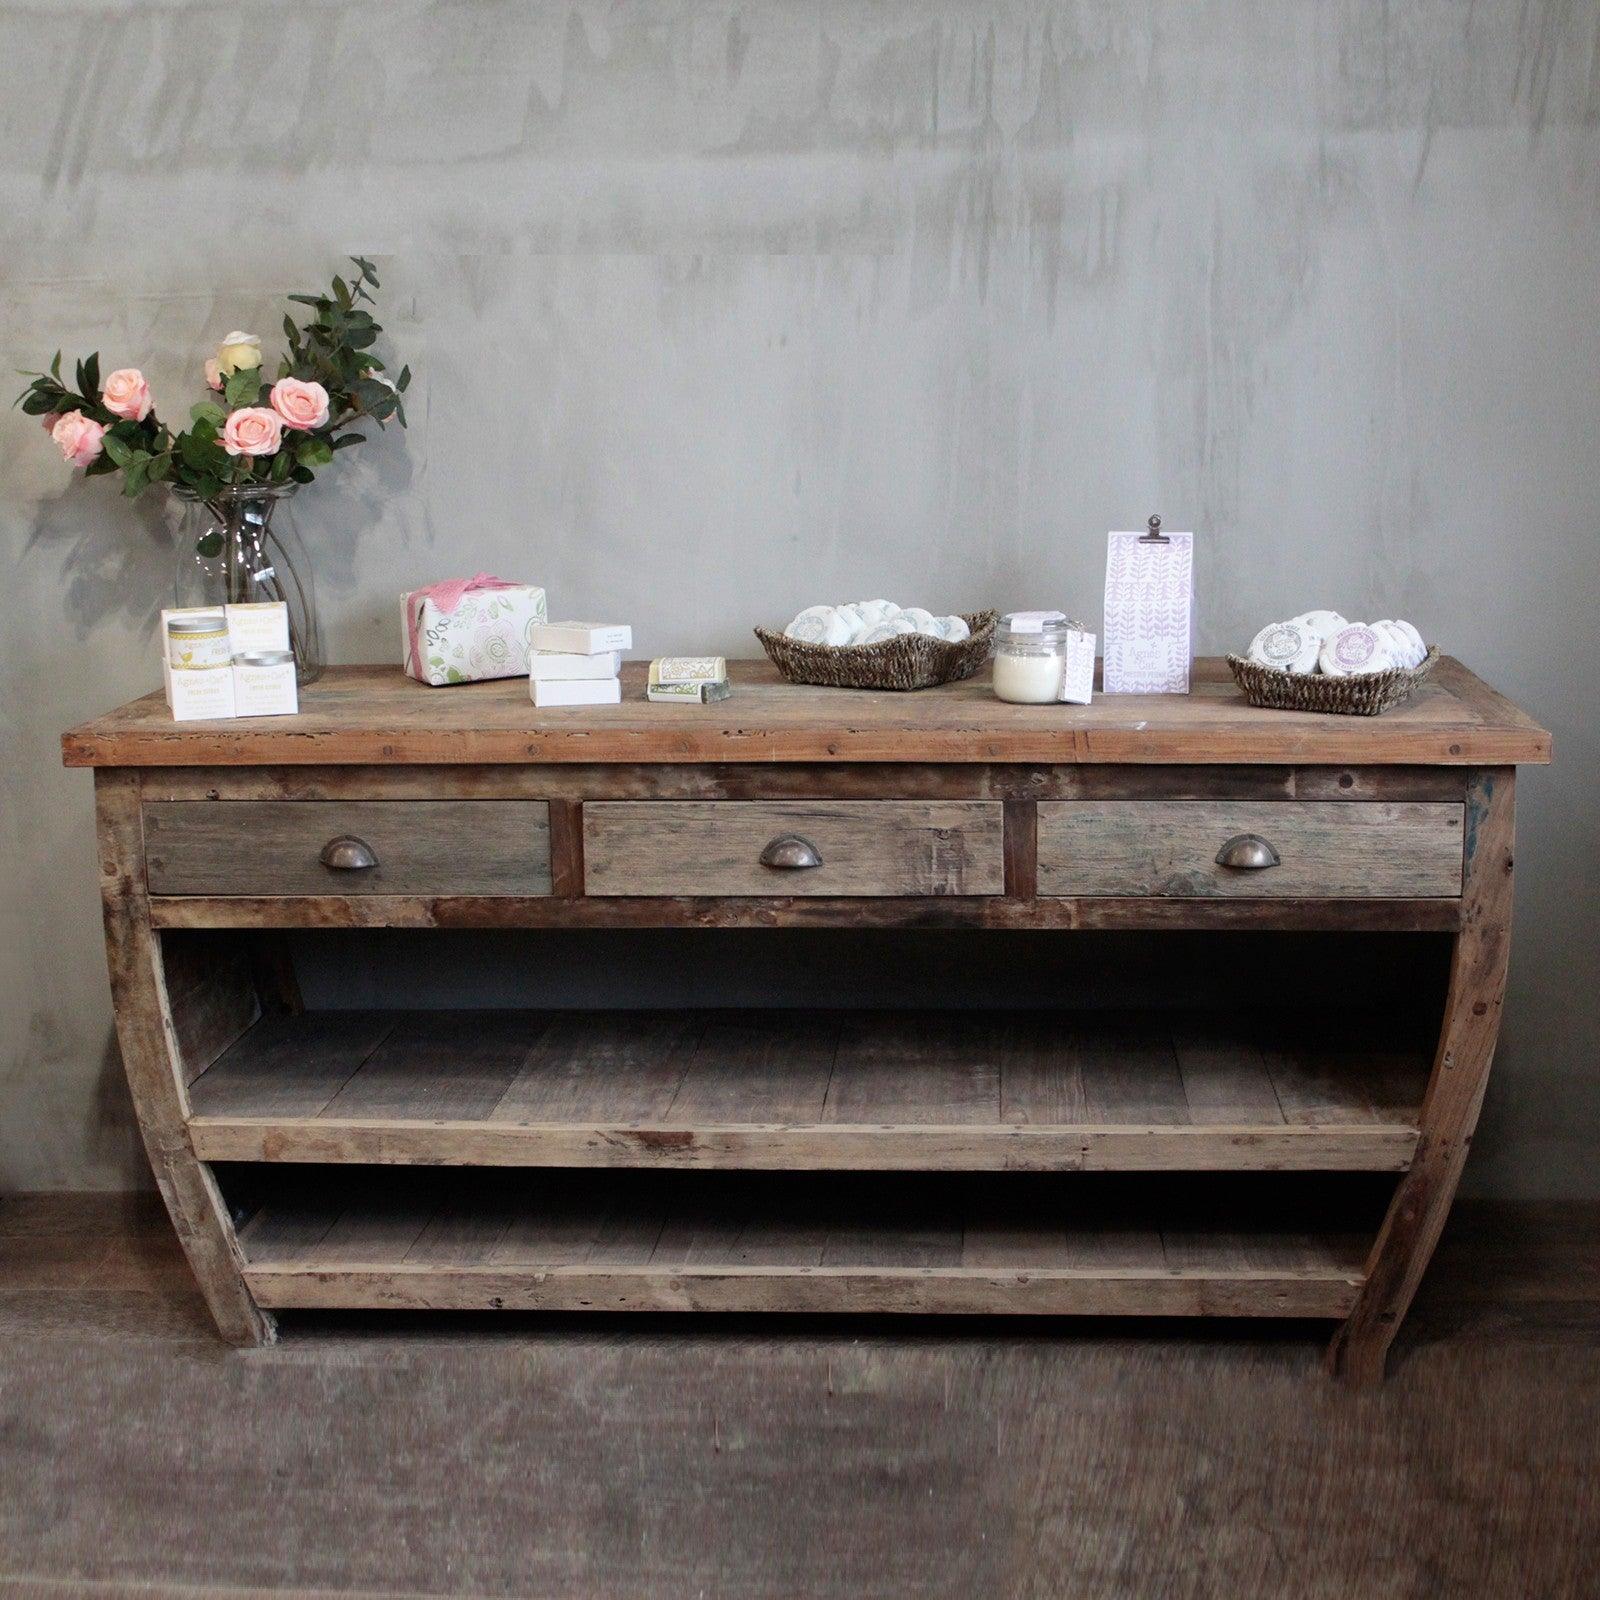 Recycled Furniture from Bali - Charming Spaces